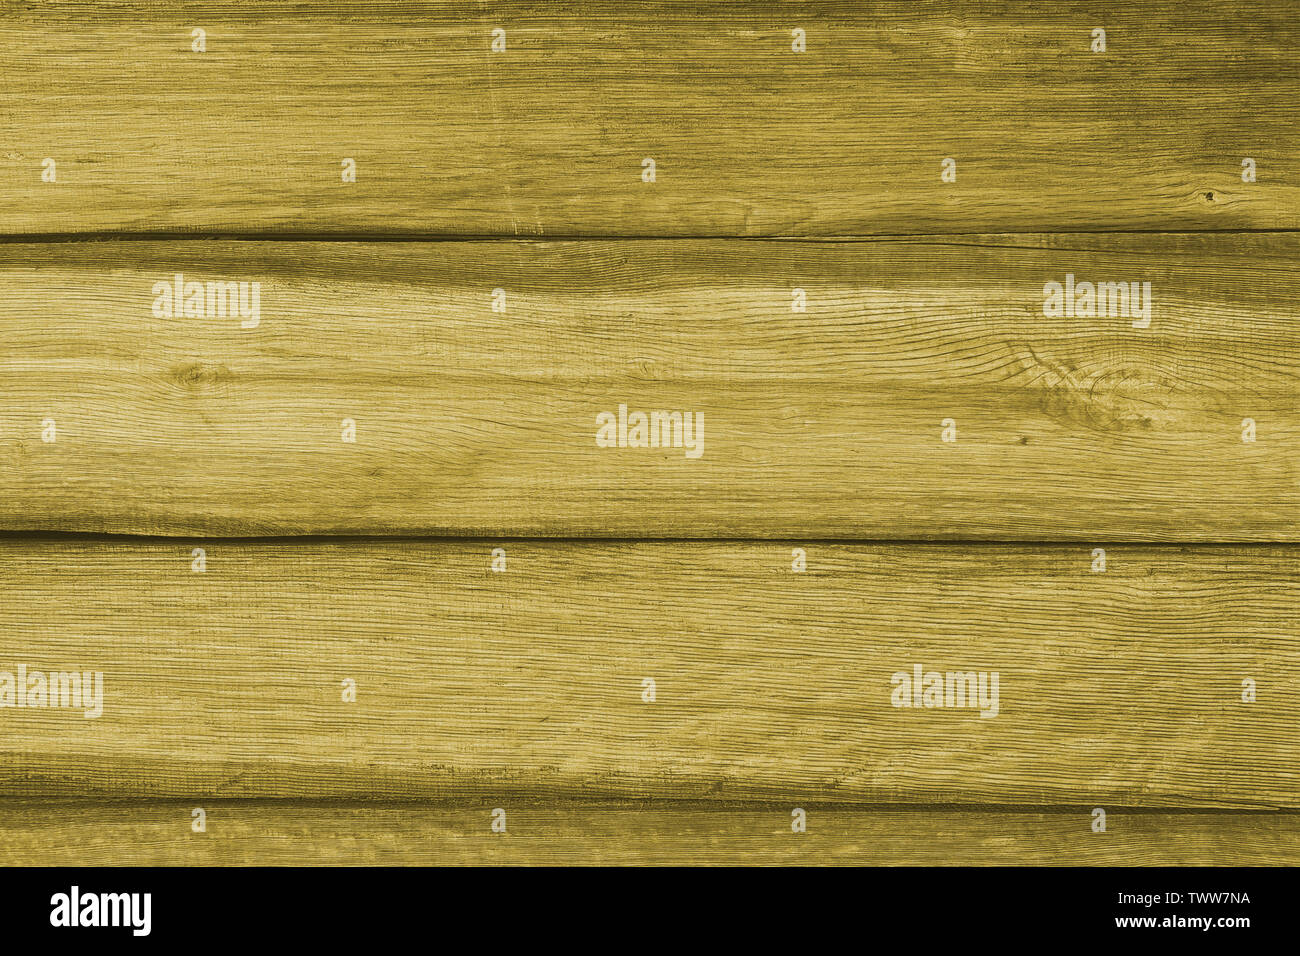 grunge wooden texture to use as background, wood texture with natural pattern Stock Photo